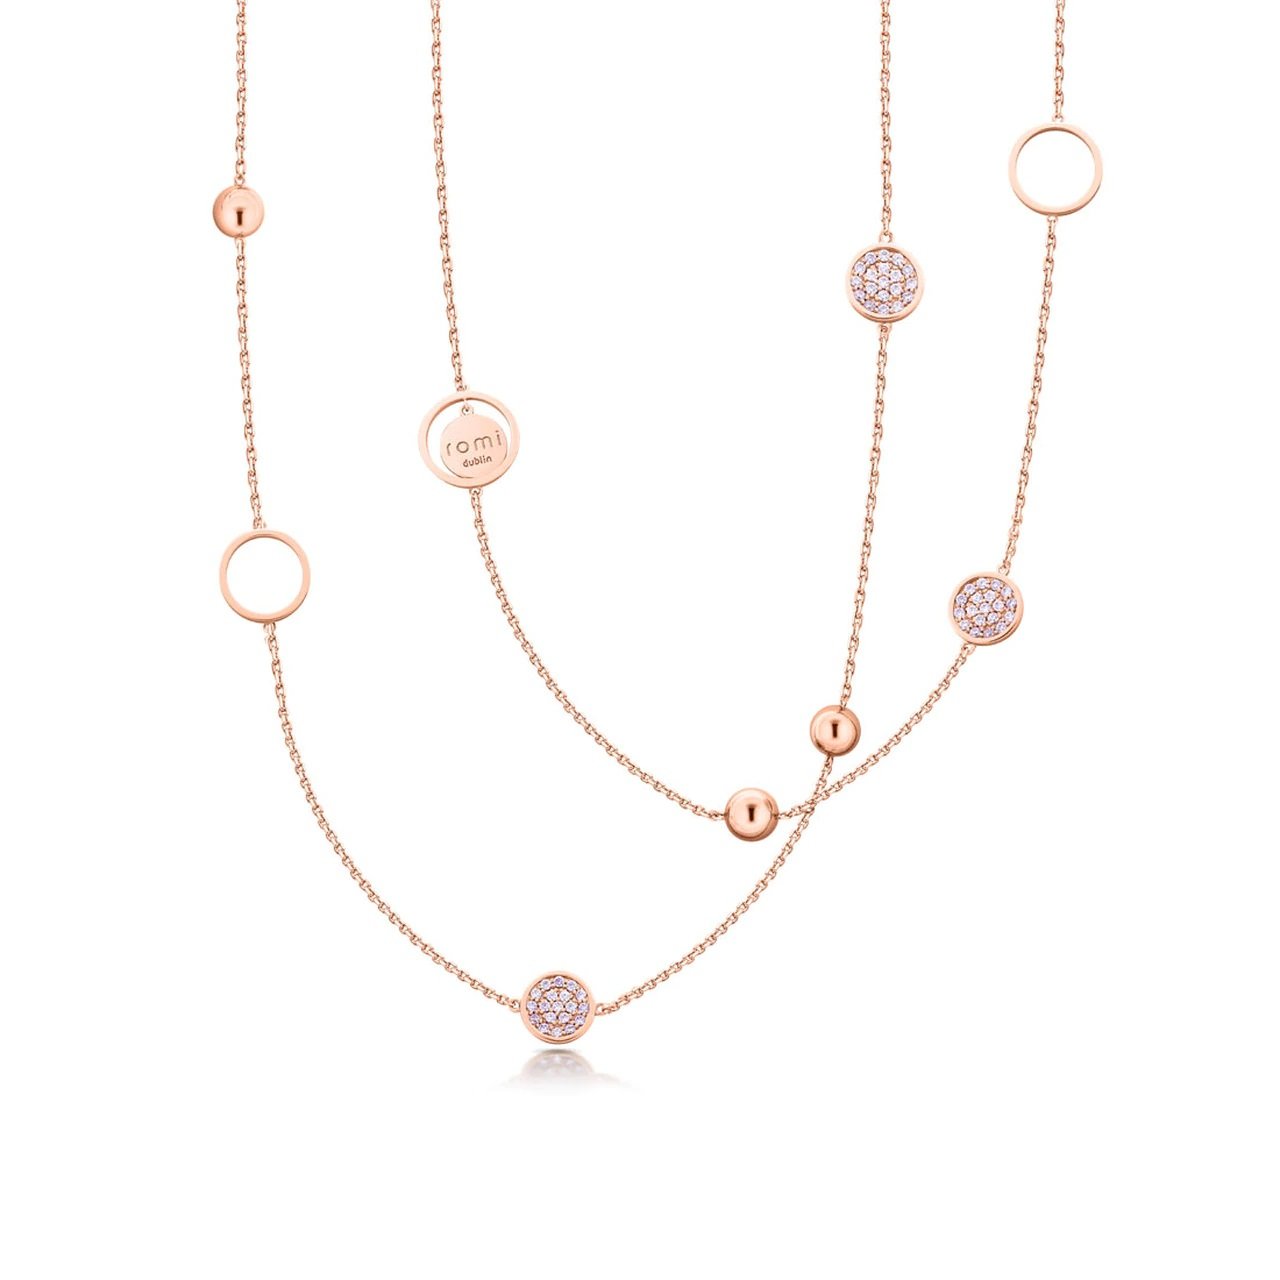 Romi Rose Gold Pavé & Bead Necklace  Simple and understated this collection has a contemporary and sleek look that will allow you to accessorise with any outfit.